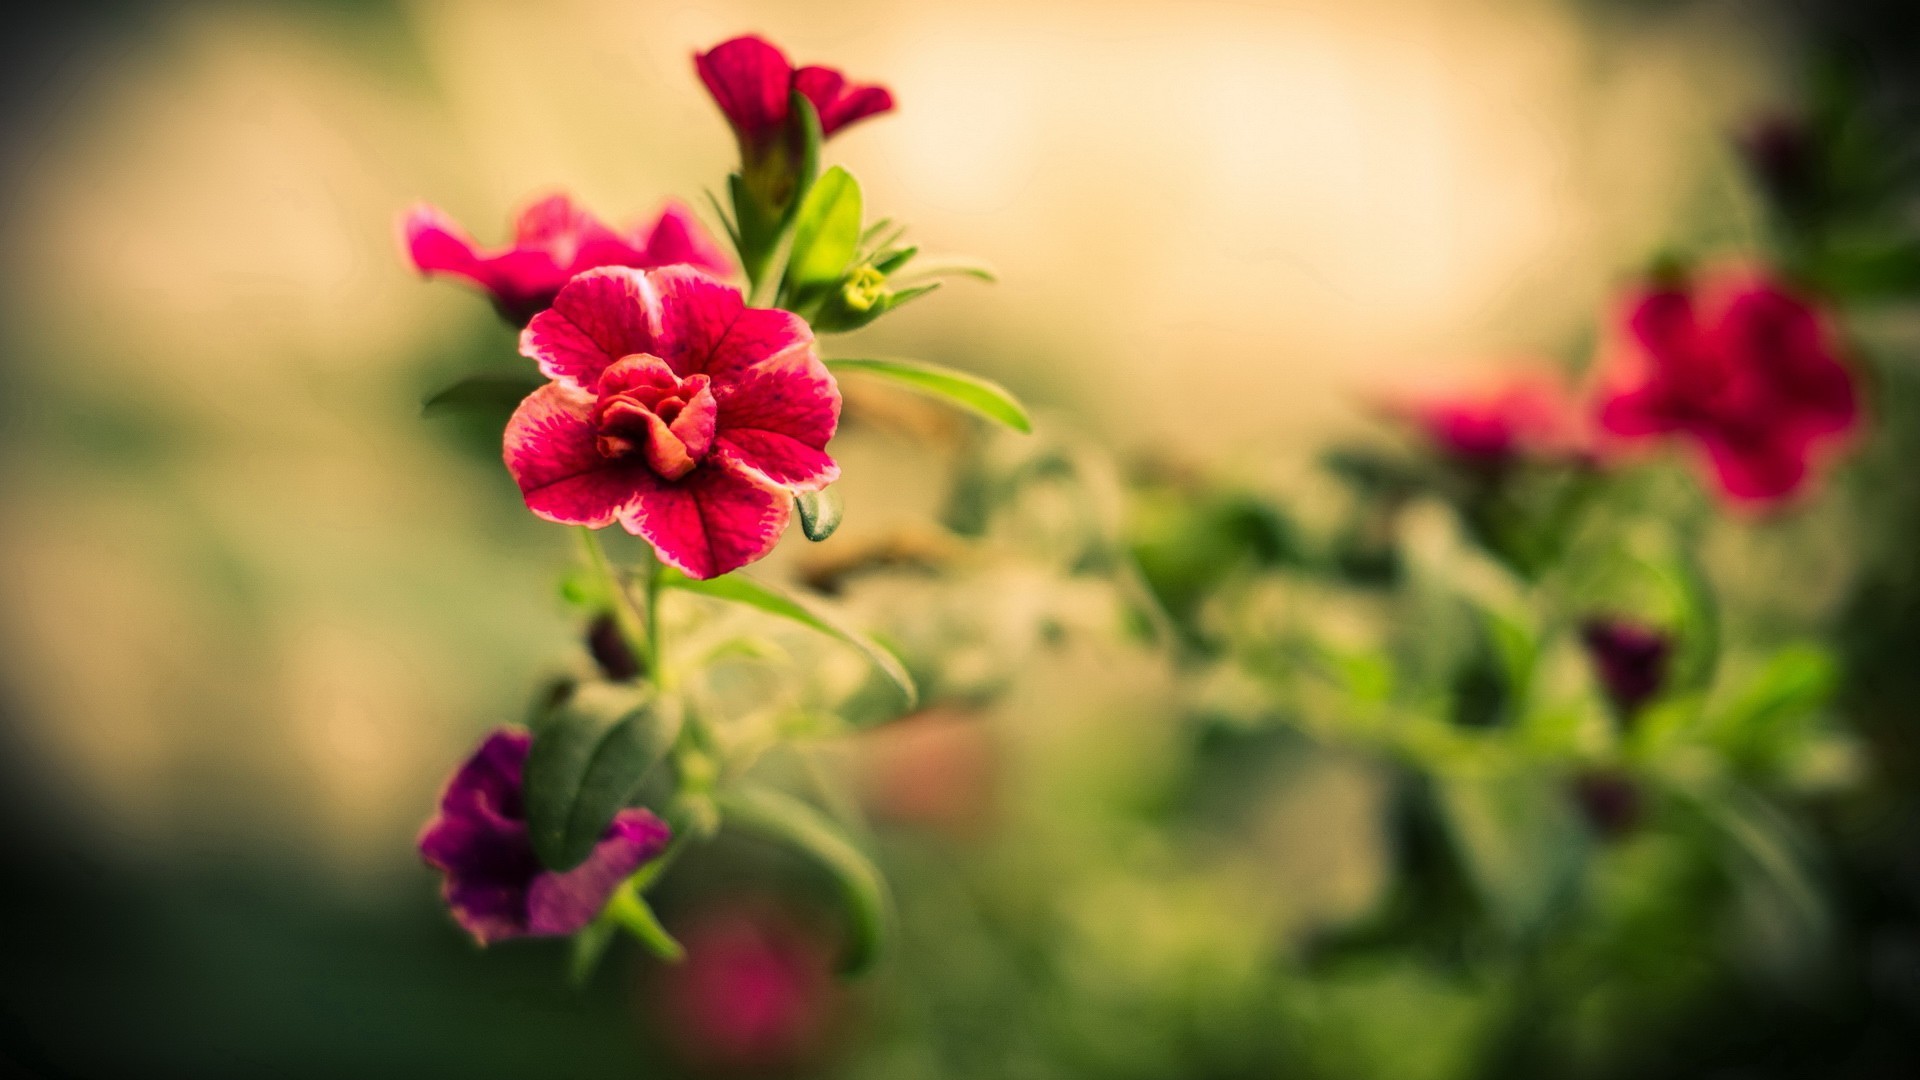 Wallpapers Of The Day: Beautiful Red Flowers | 1920x1080px ...